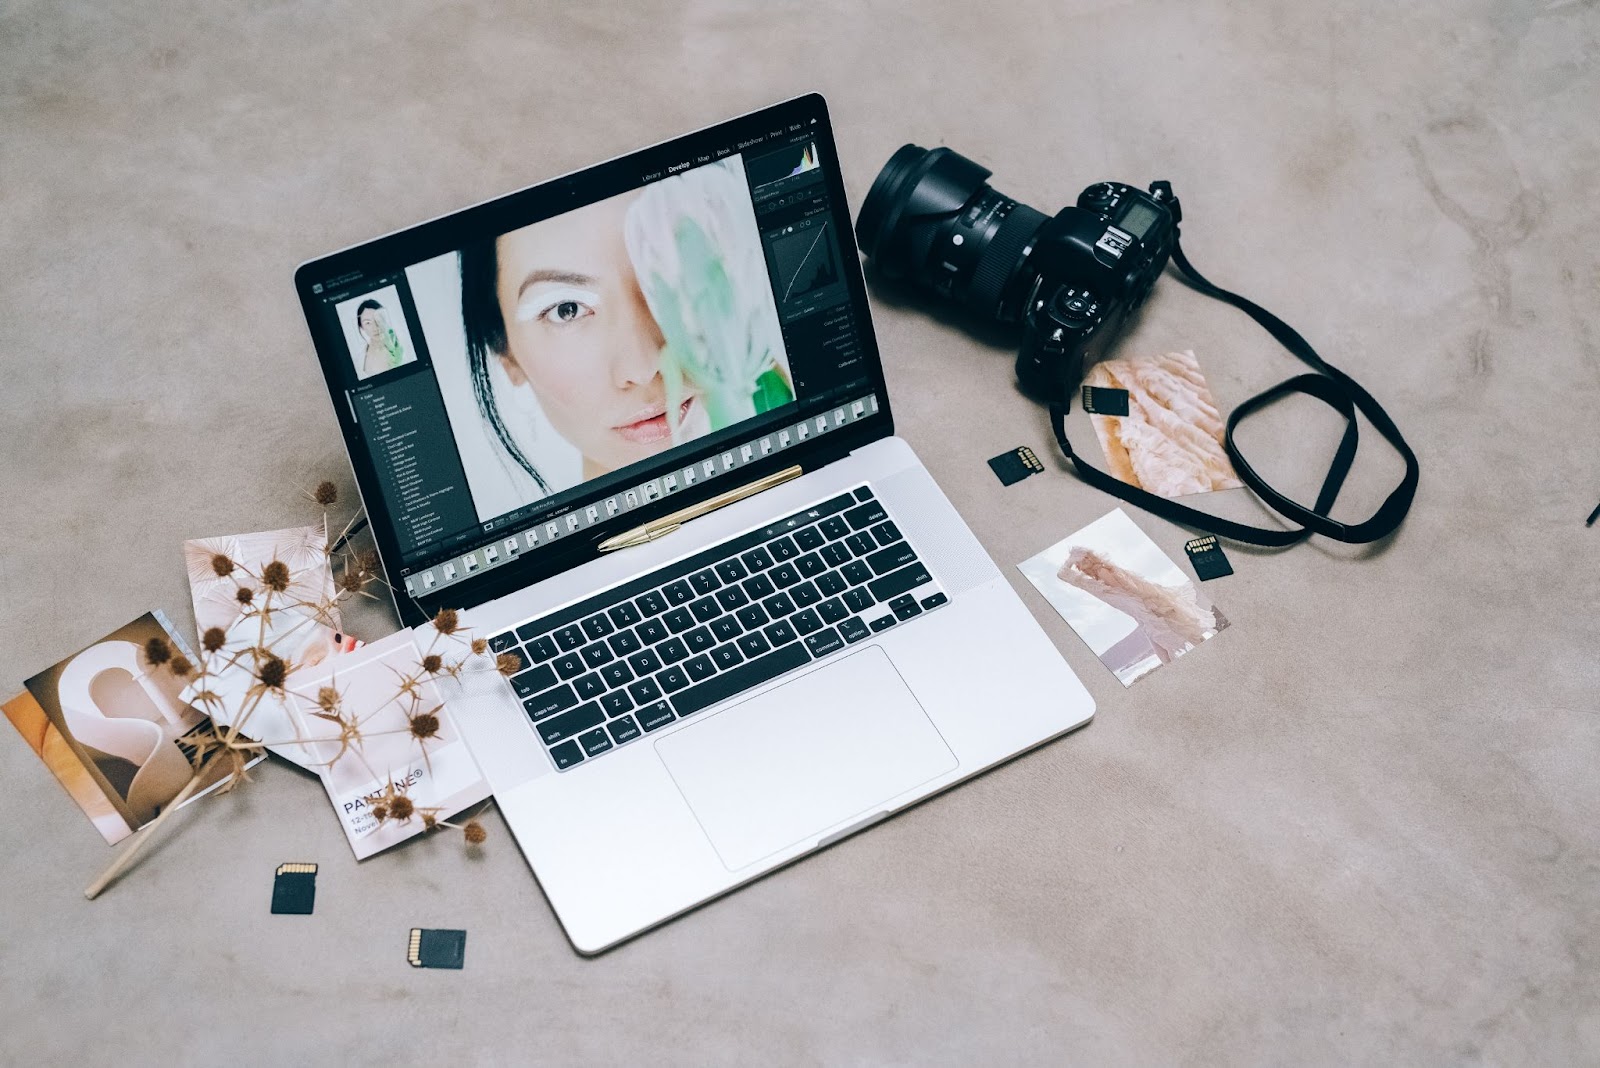 Top 3 Automatic Photo Editing Software